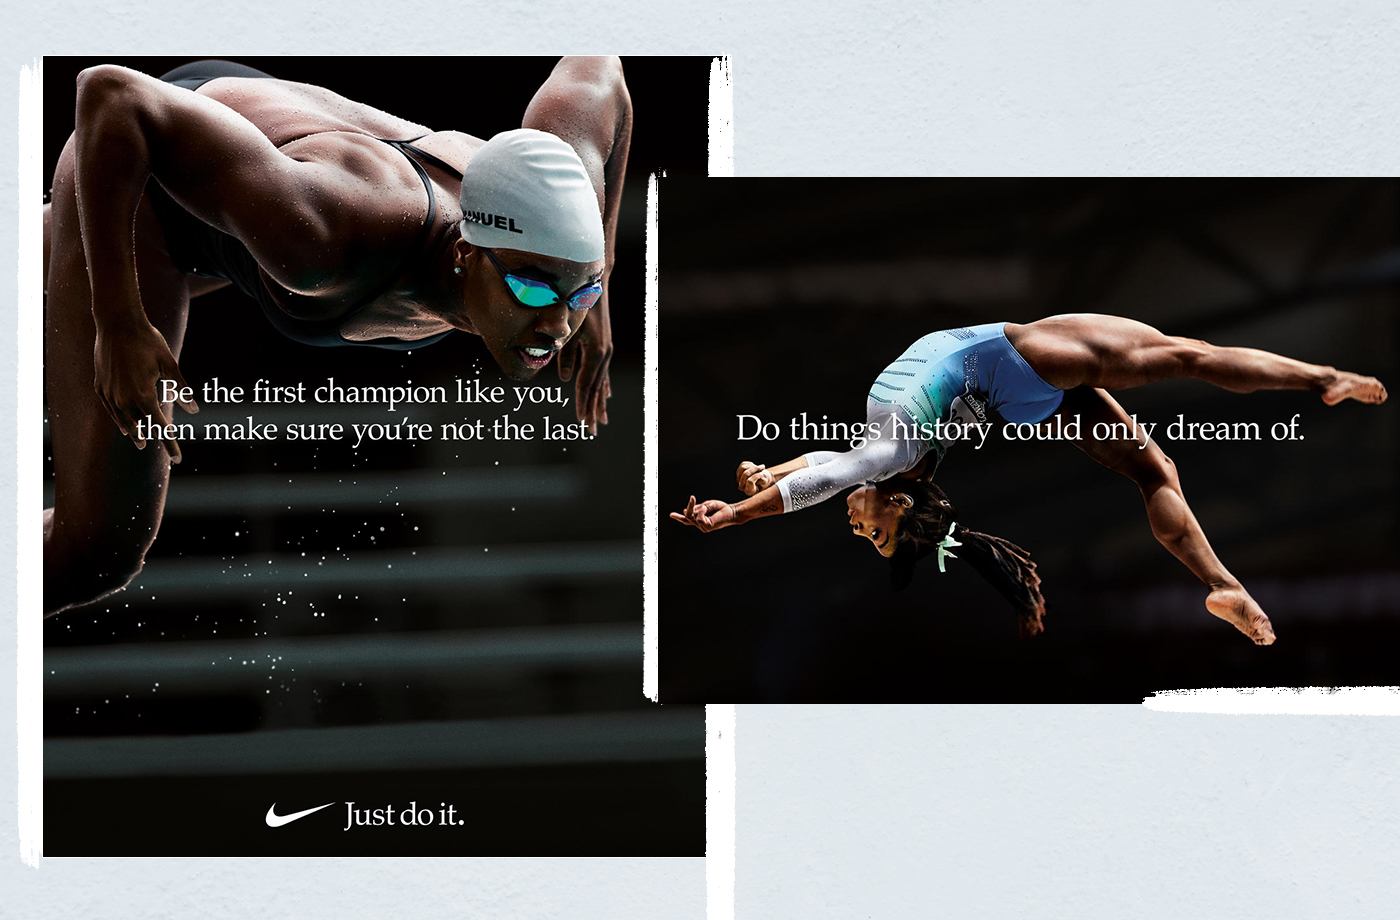 new nike womens commercial